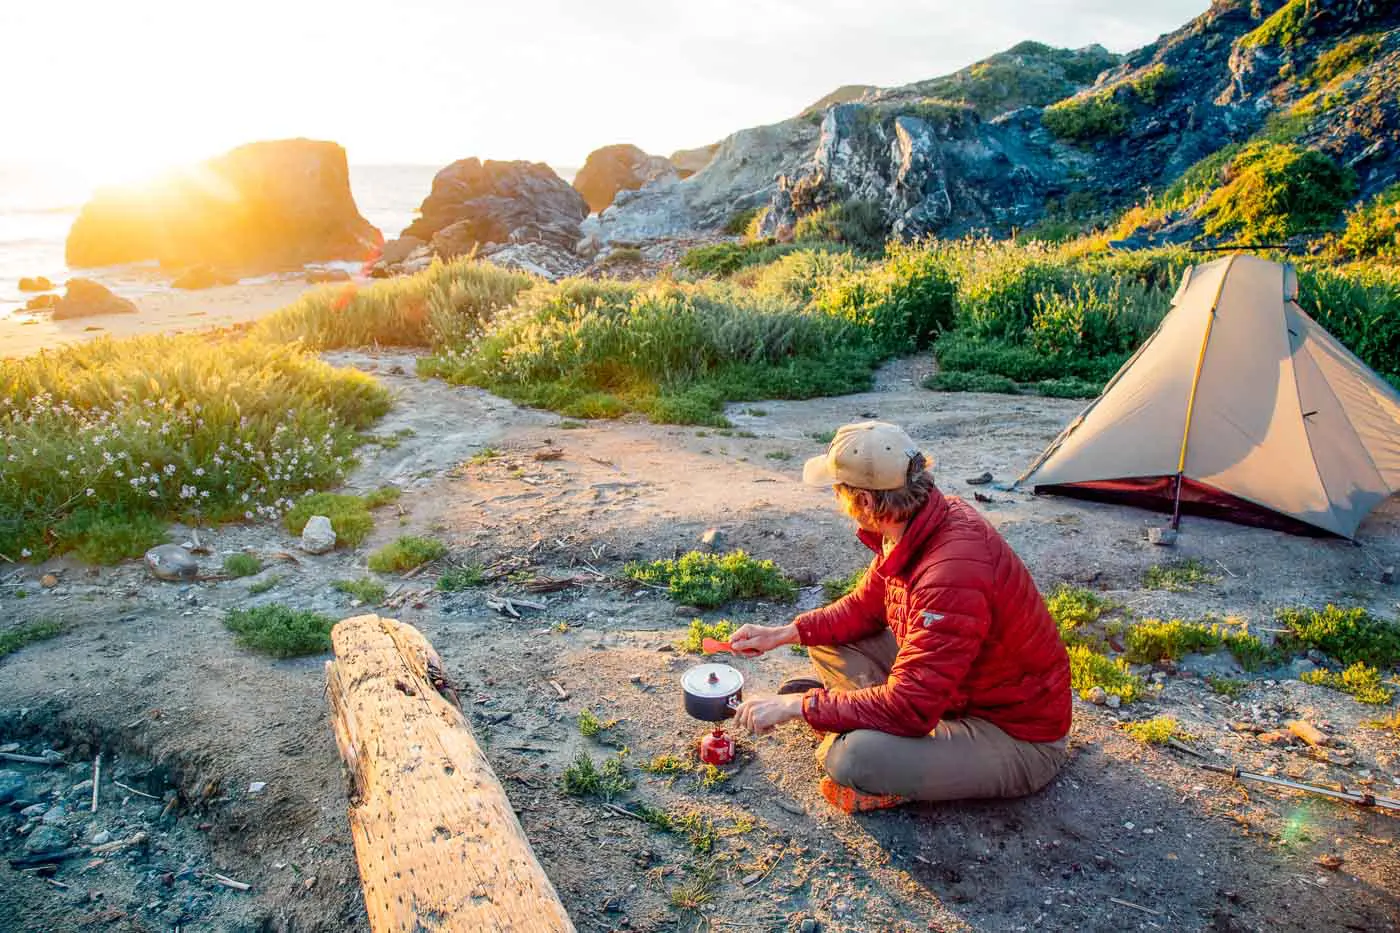 Man cooking over a backpacking stove on the beach